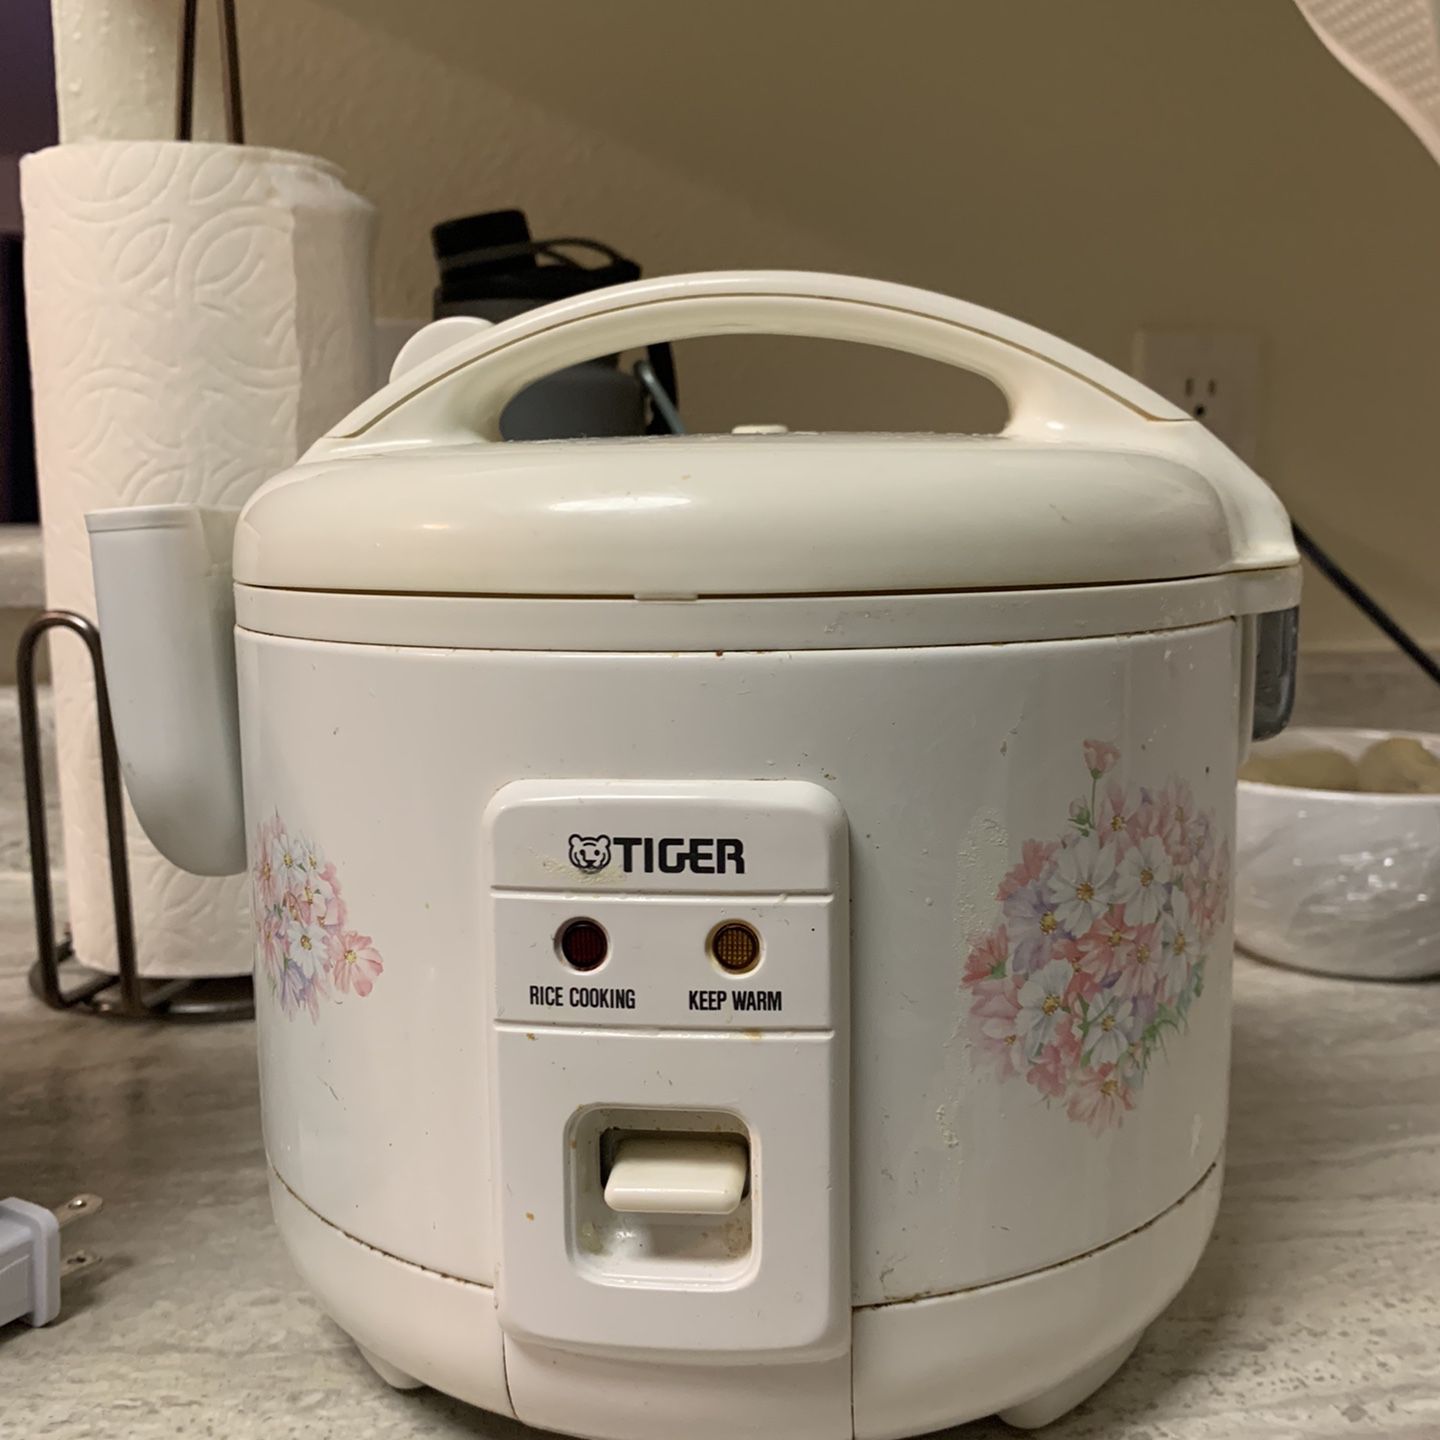 Buffalo Rice Cooker for Sale in Houston, TX - OfferUp